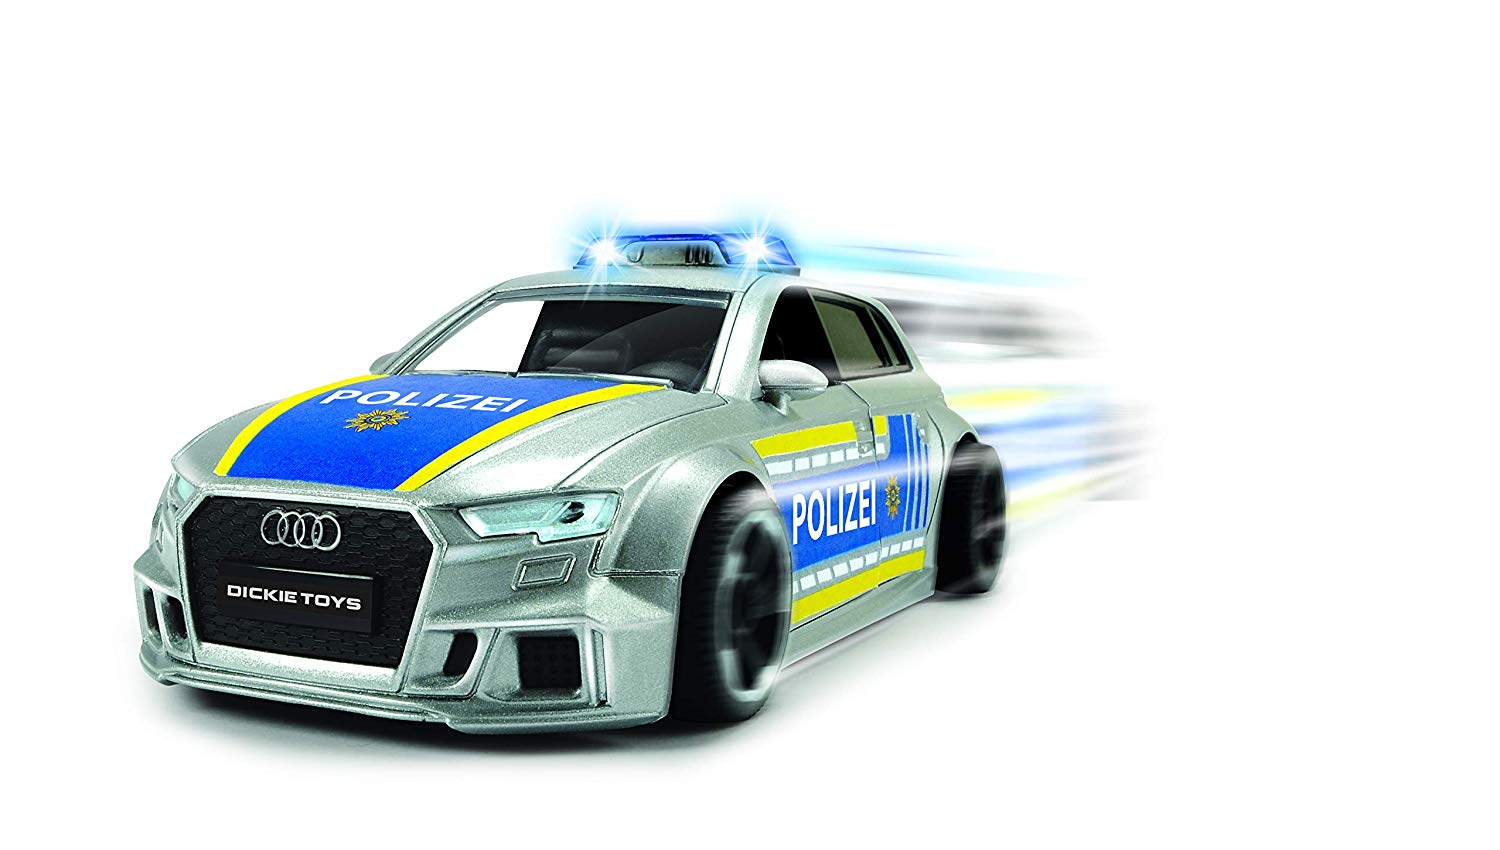 Dickie Toys 203713011 Audi Rs3 Police Car With Friction, Light And Sound, A